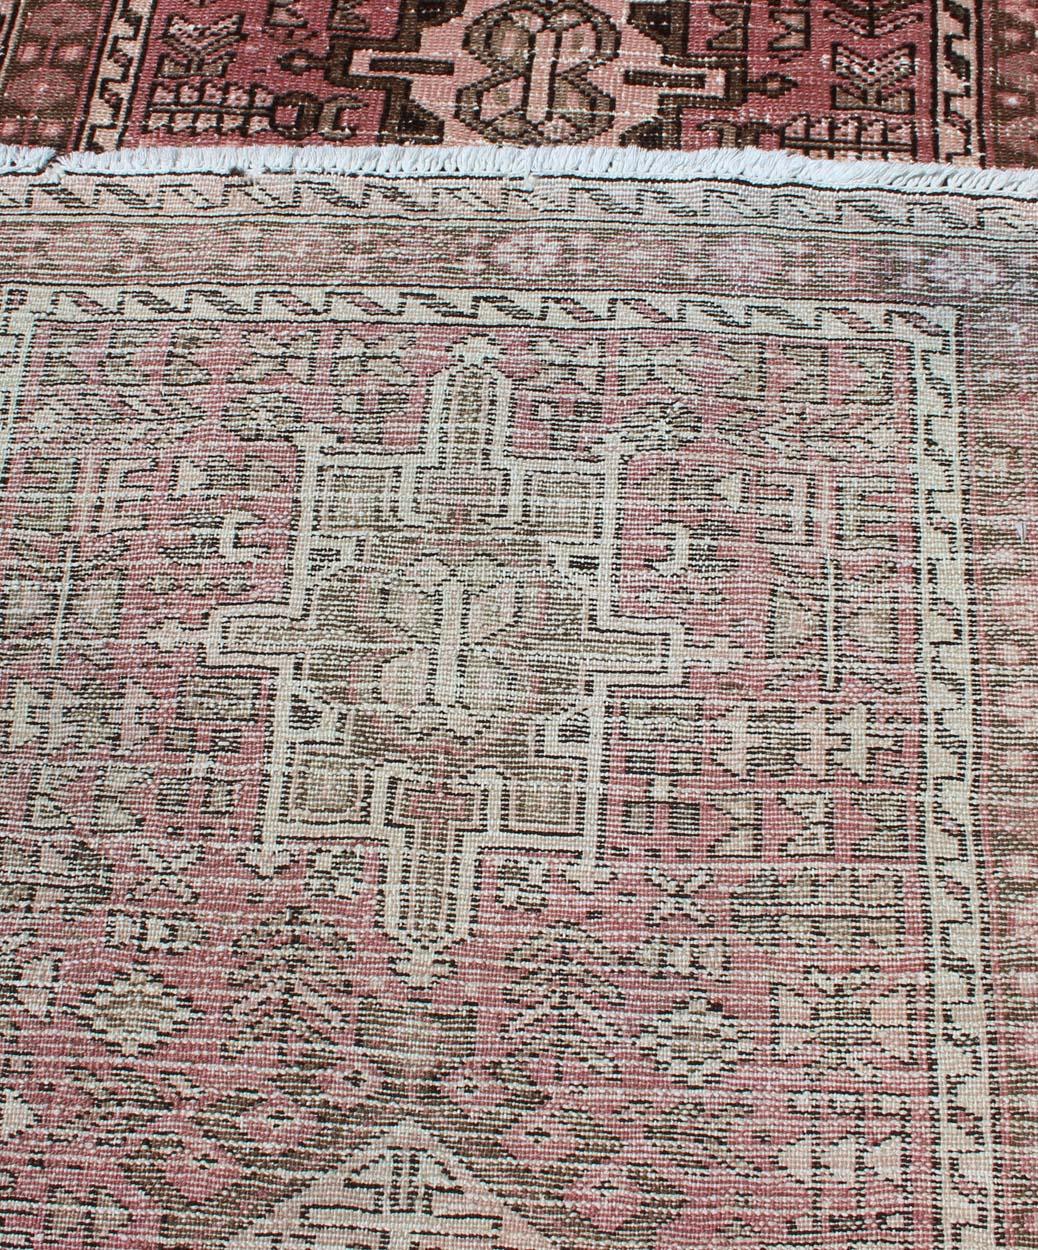 Long Narrow Persian Heriz Runner with Tribal Design in Pink and Taupe For Sale 2